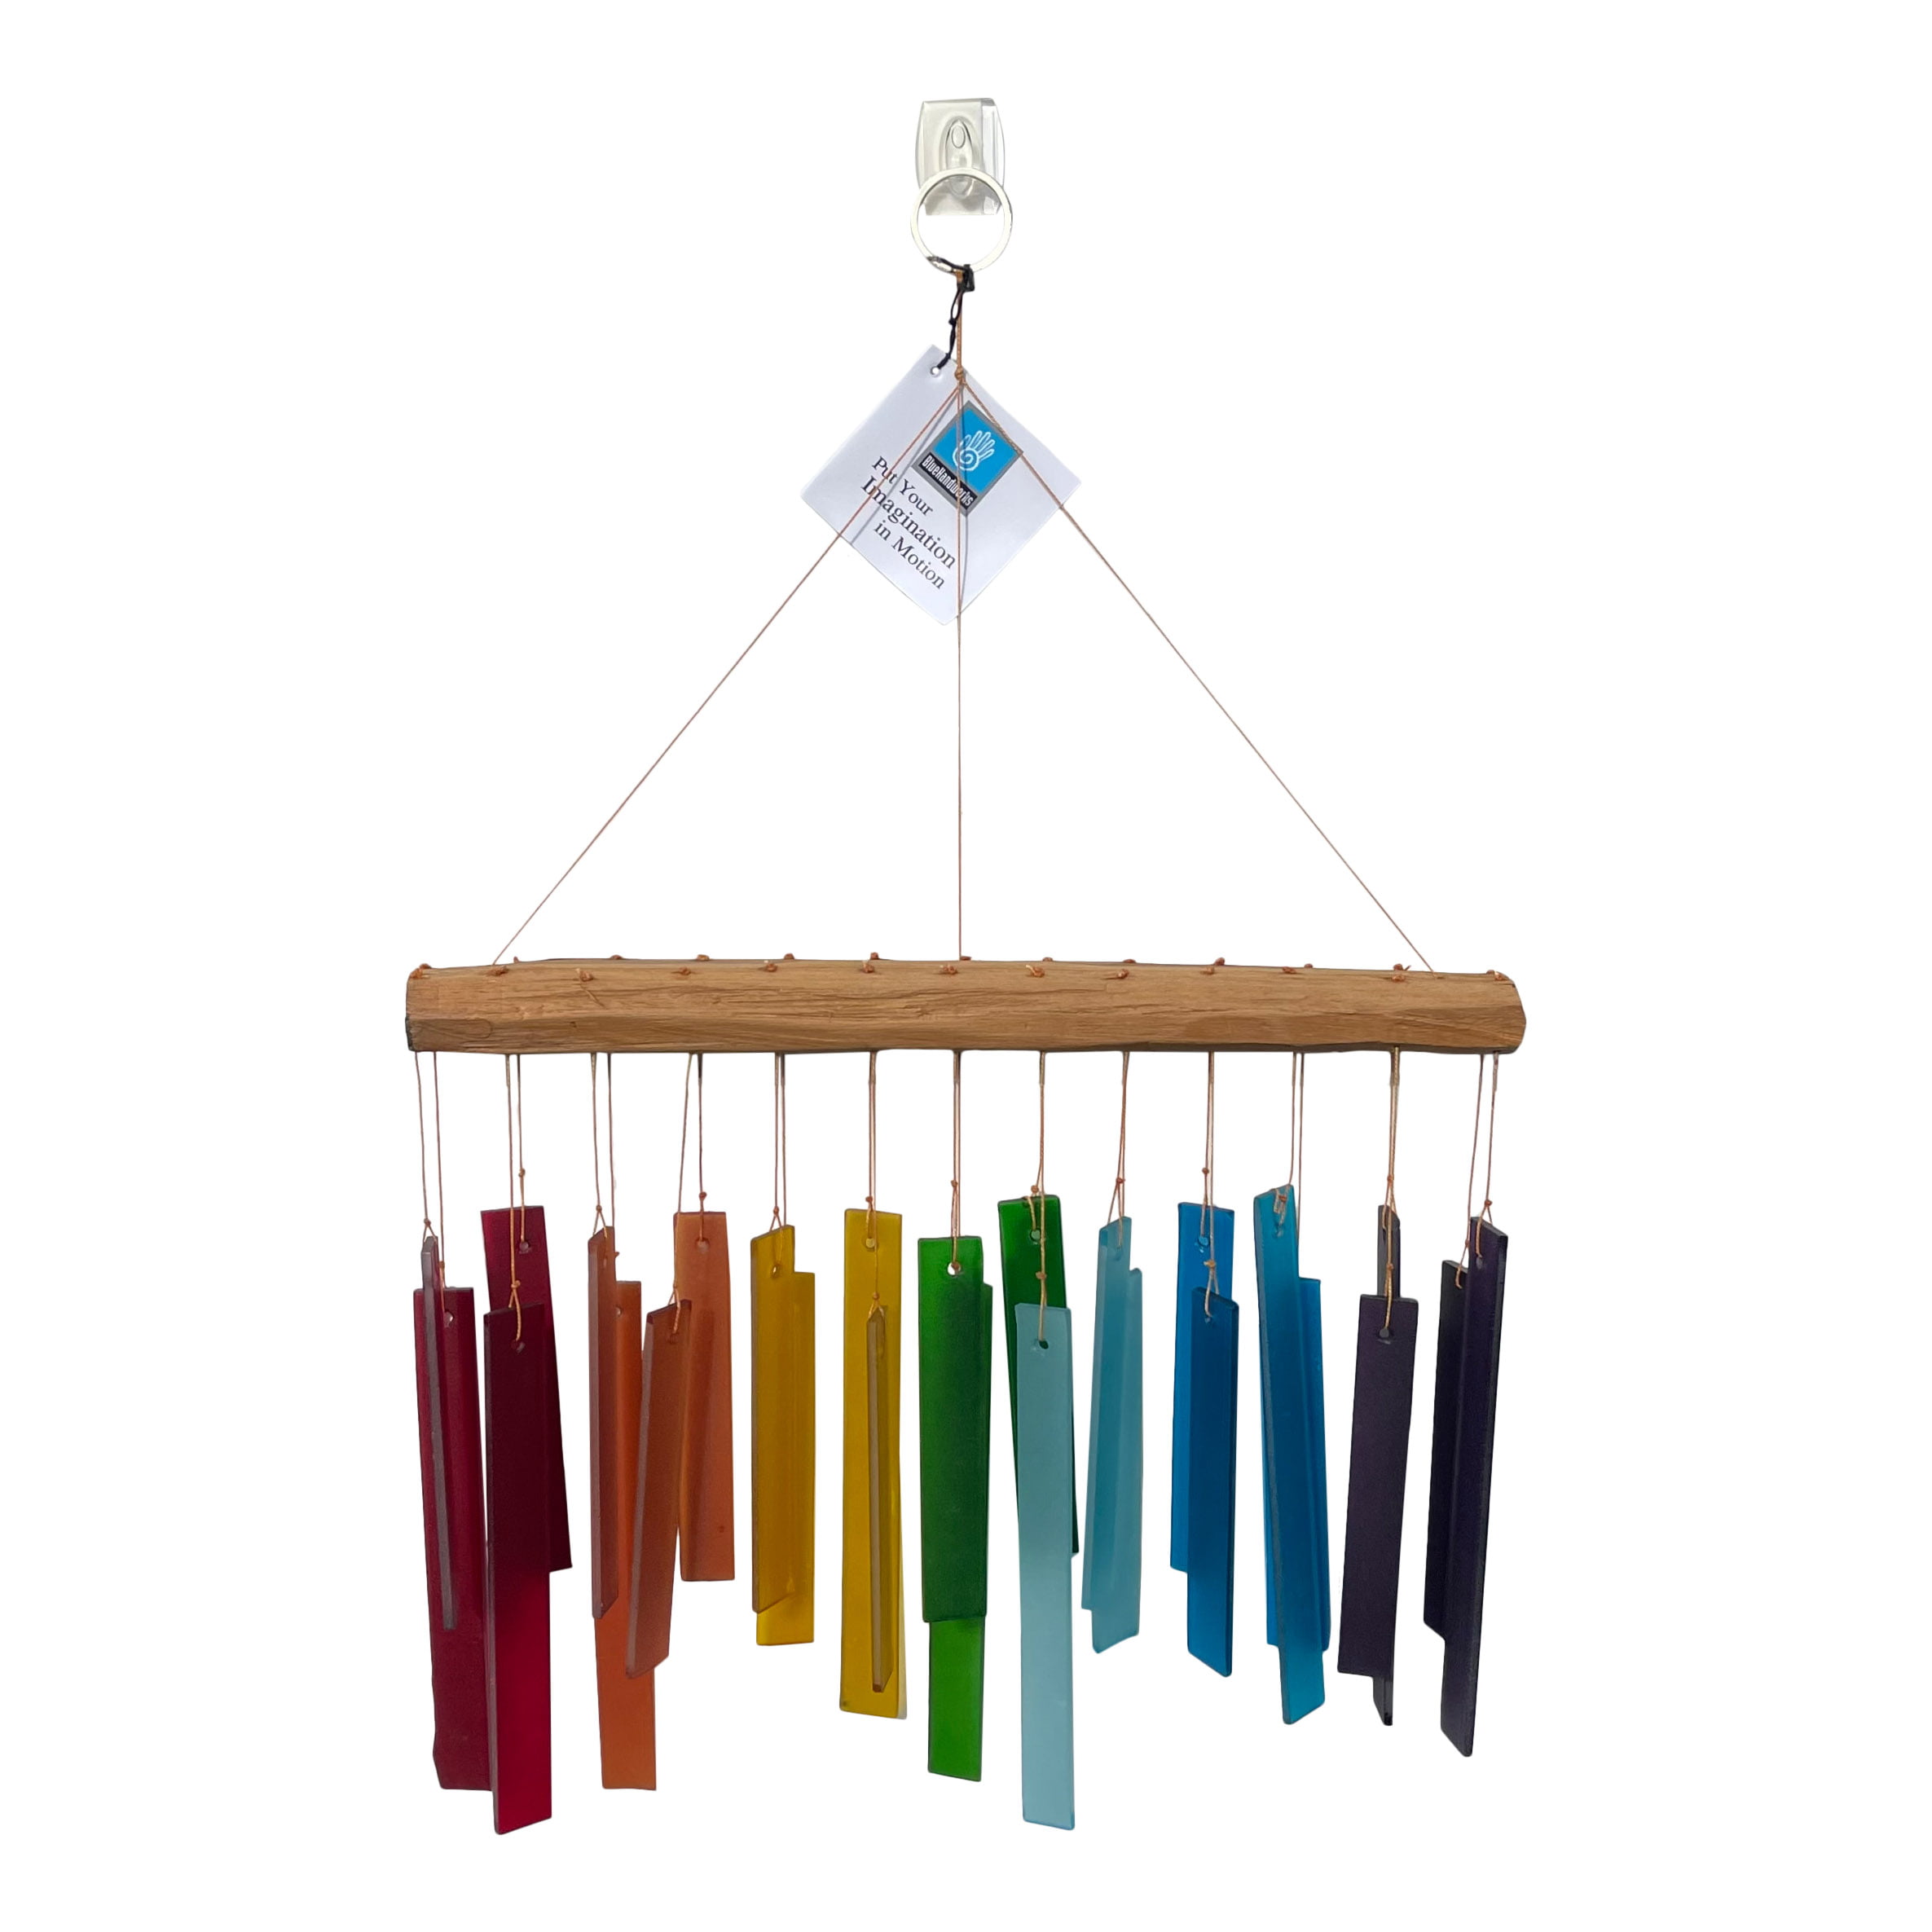 Details about   Seaglass Seahorse Hanging Driftwood Windchime Summer Garden Present Recycled 